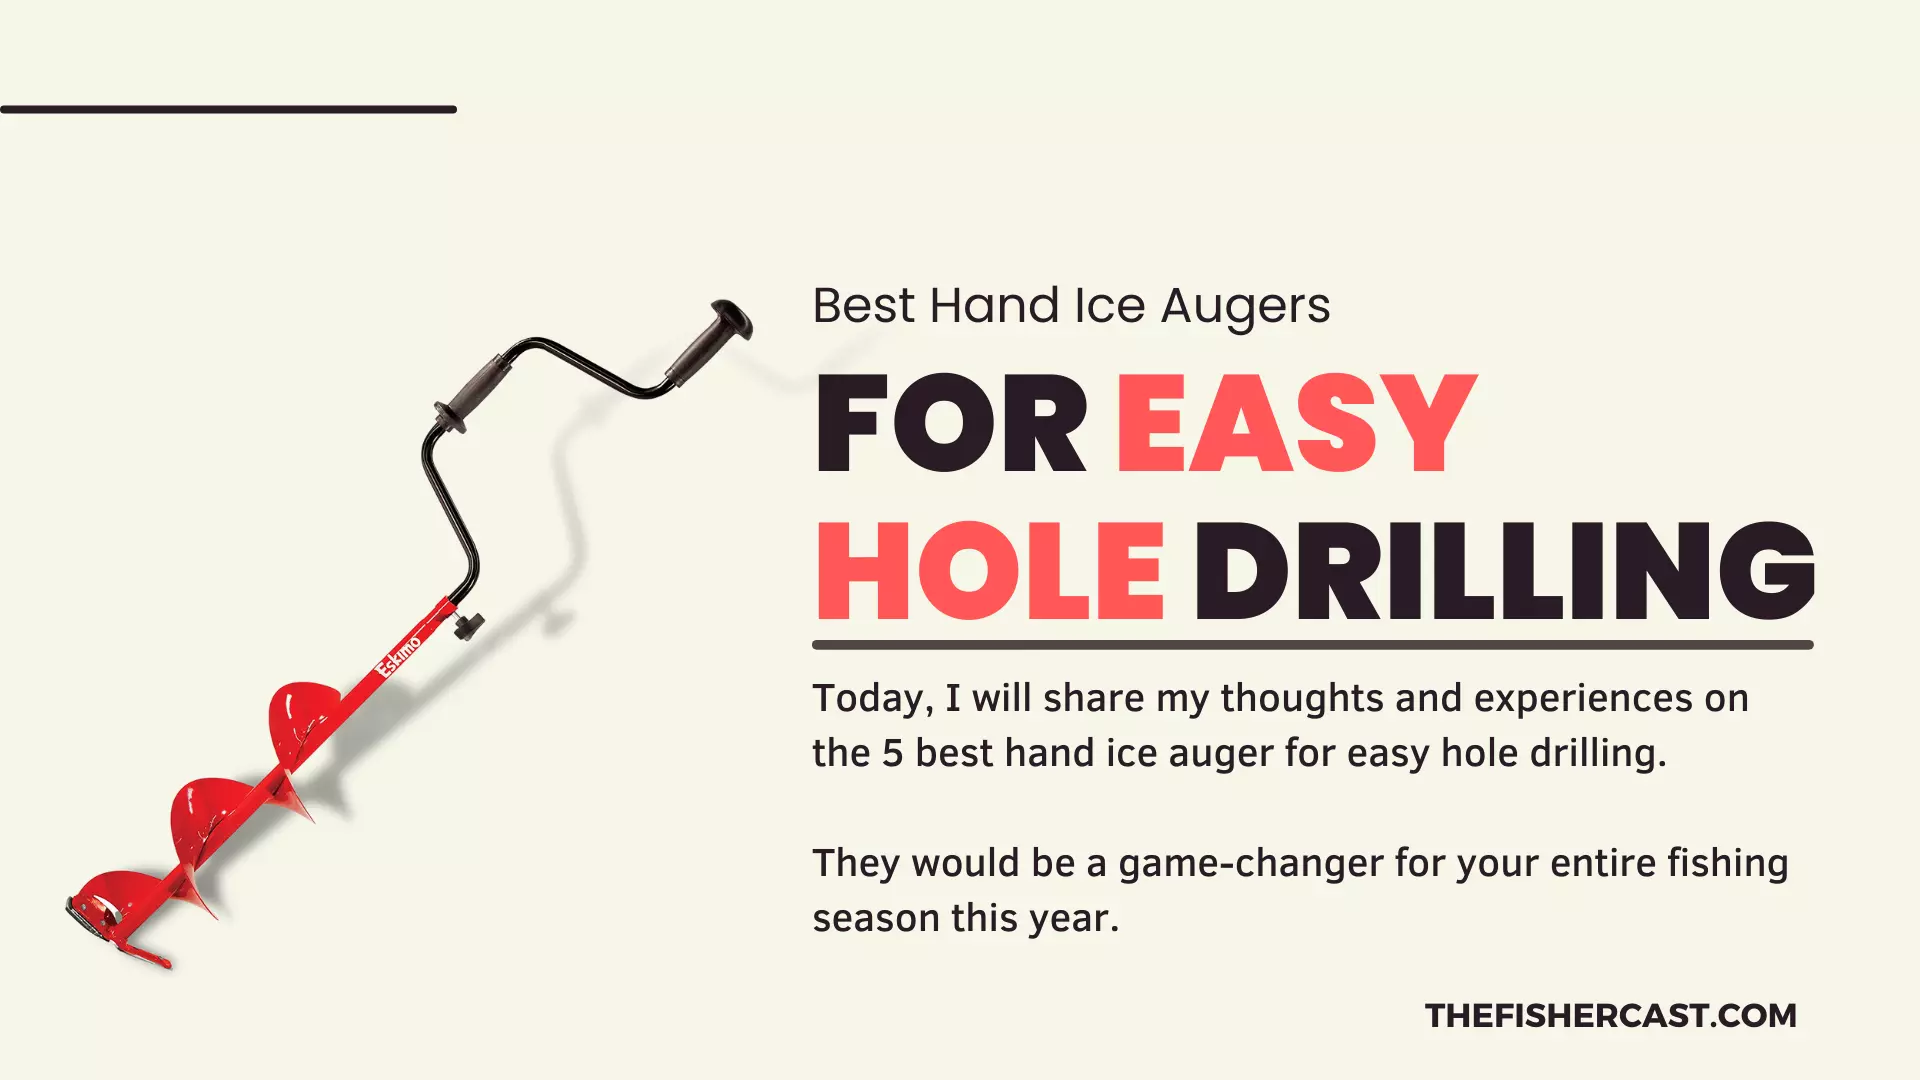 Best Hand Ice Augers For Easy Hole Drilling